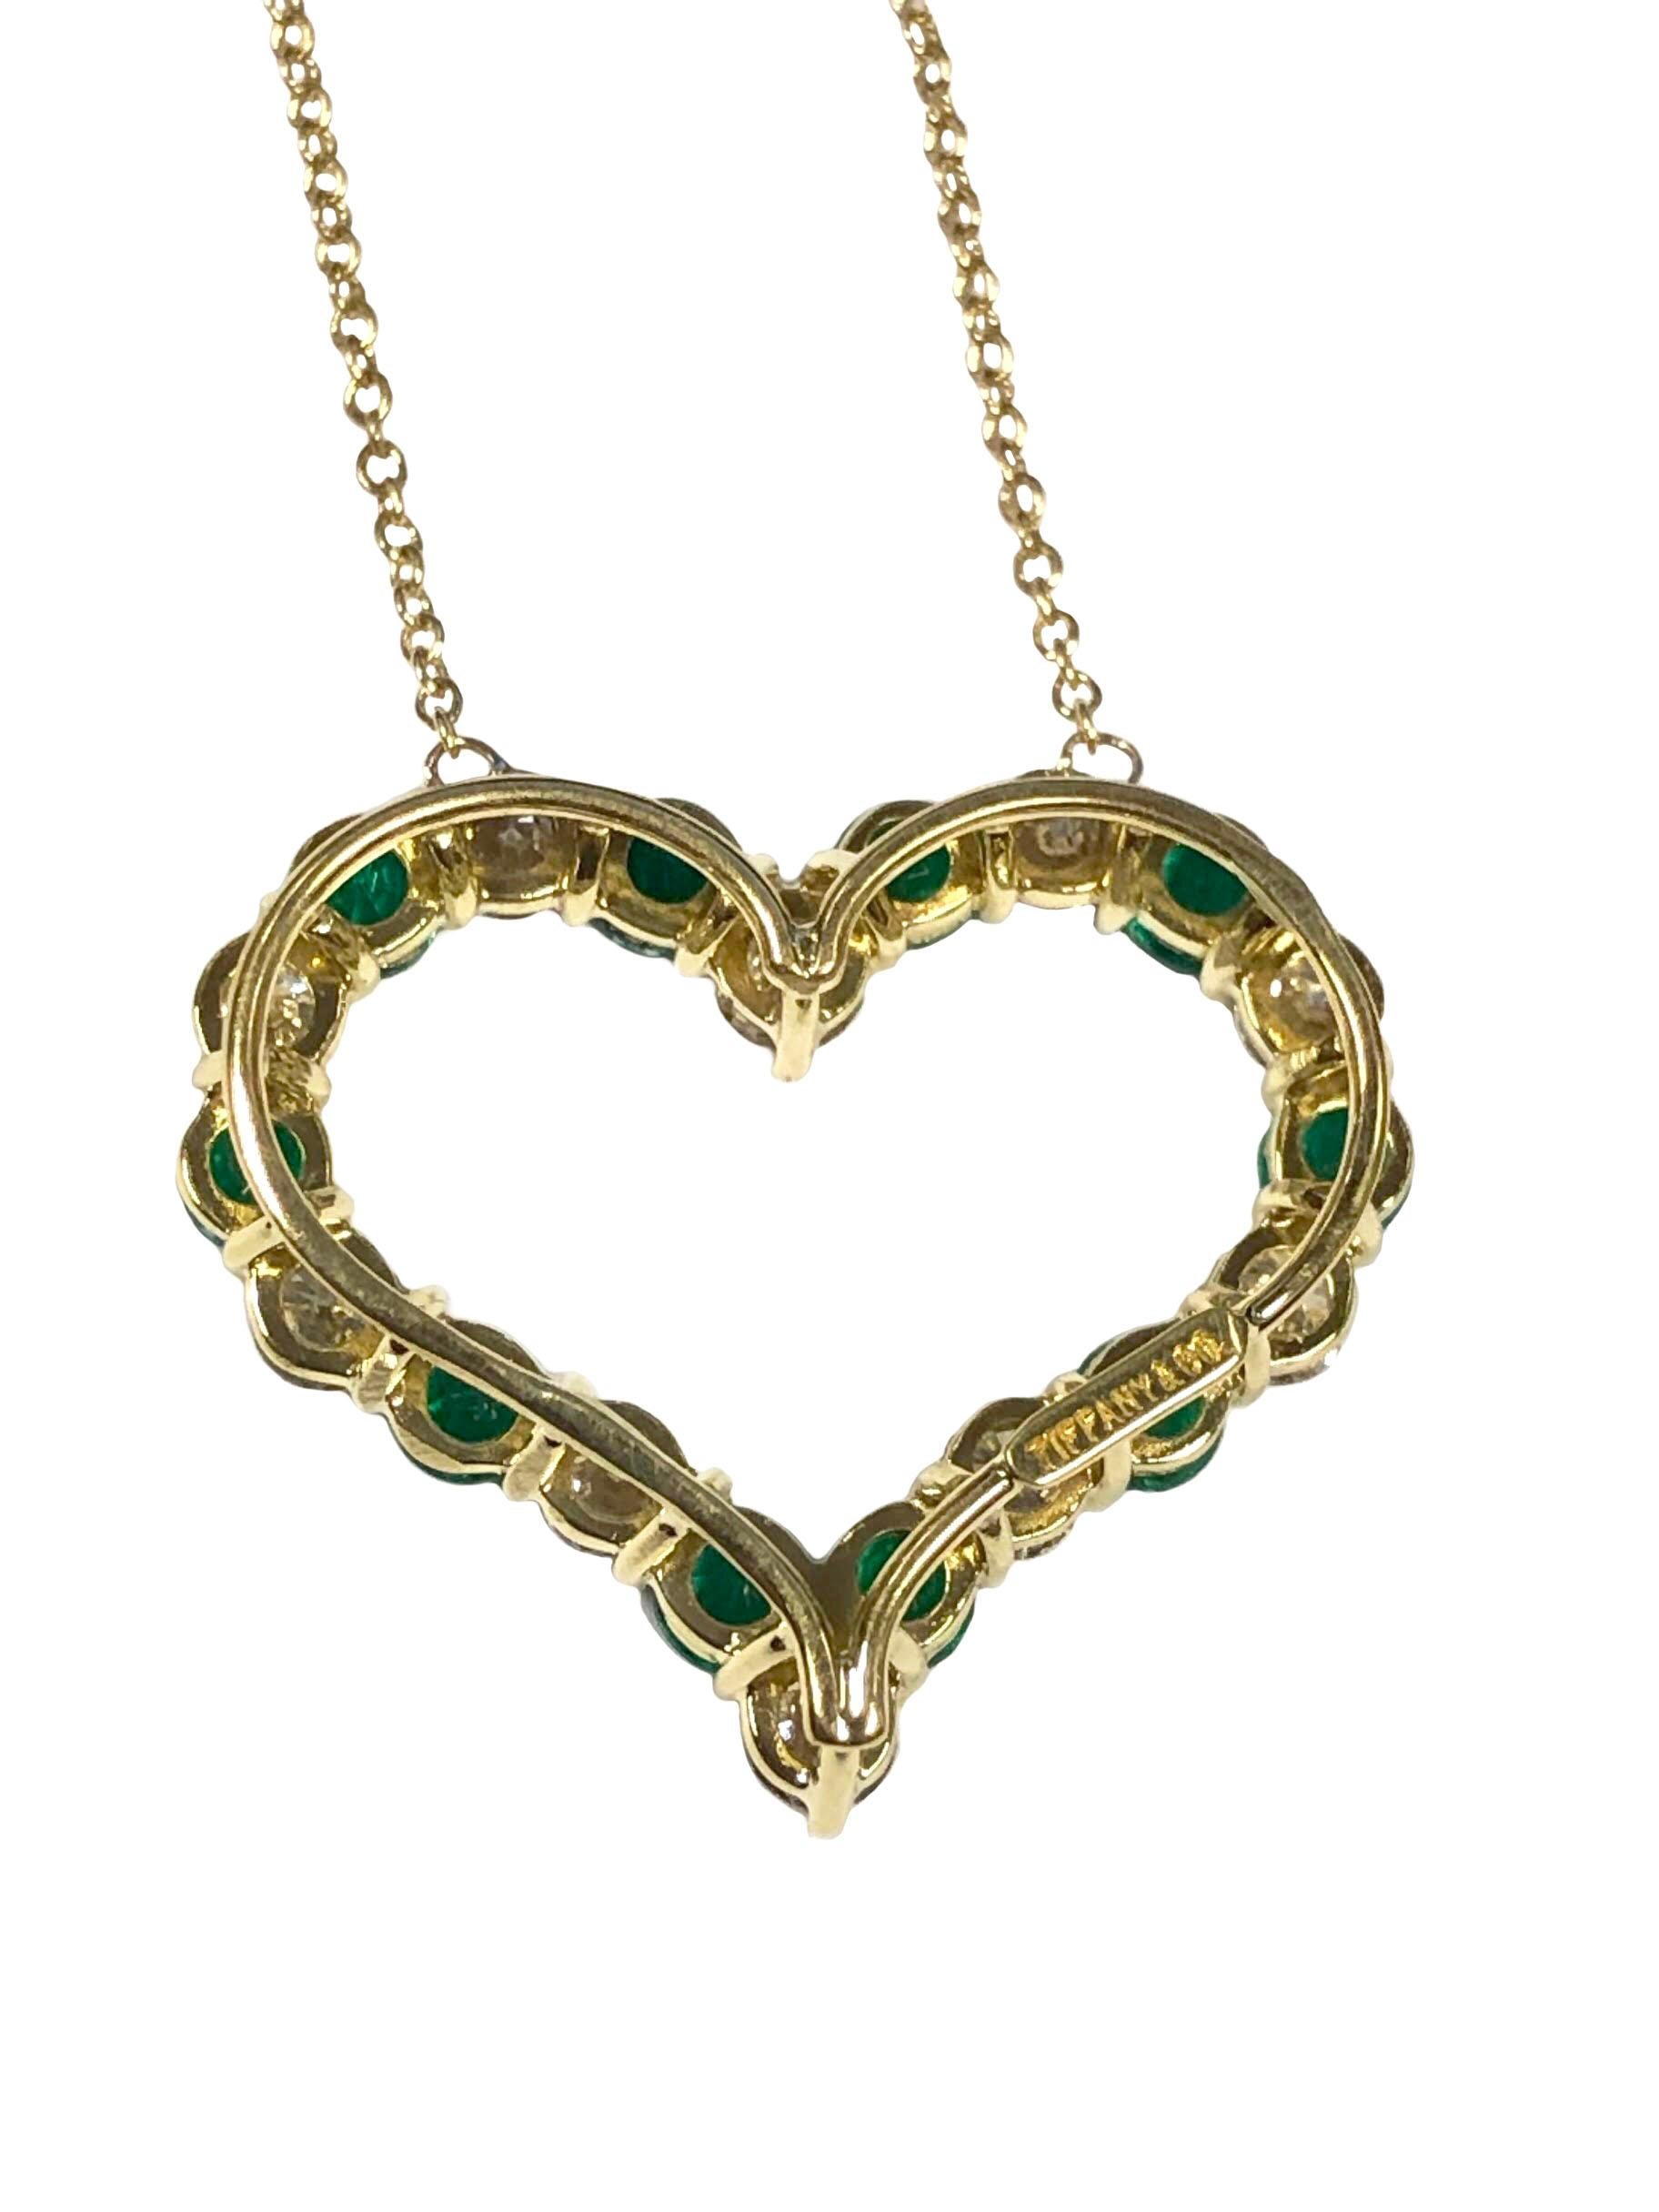 Circa 2000 Tiffany & Company 18K yellow Gold Heart Pendant Necklace, the Heart measures 7/8 inch in length X 1/2 inch wide, set with very fine Bright color Emeralds totaling approximately 1.30 Carats and further set with Round Brilliant cut Diamonds